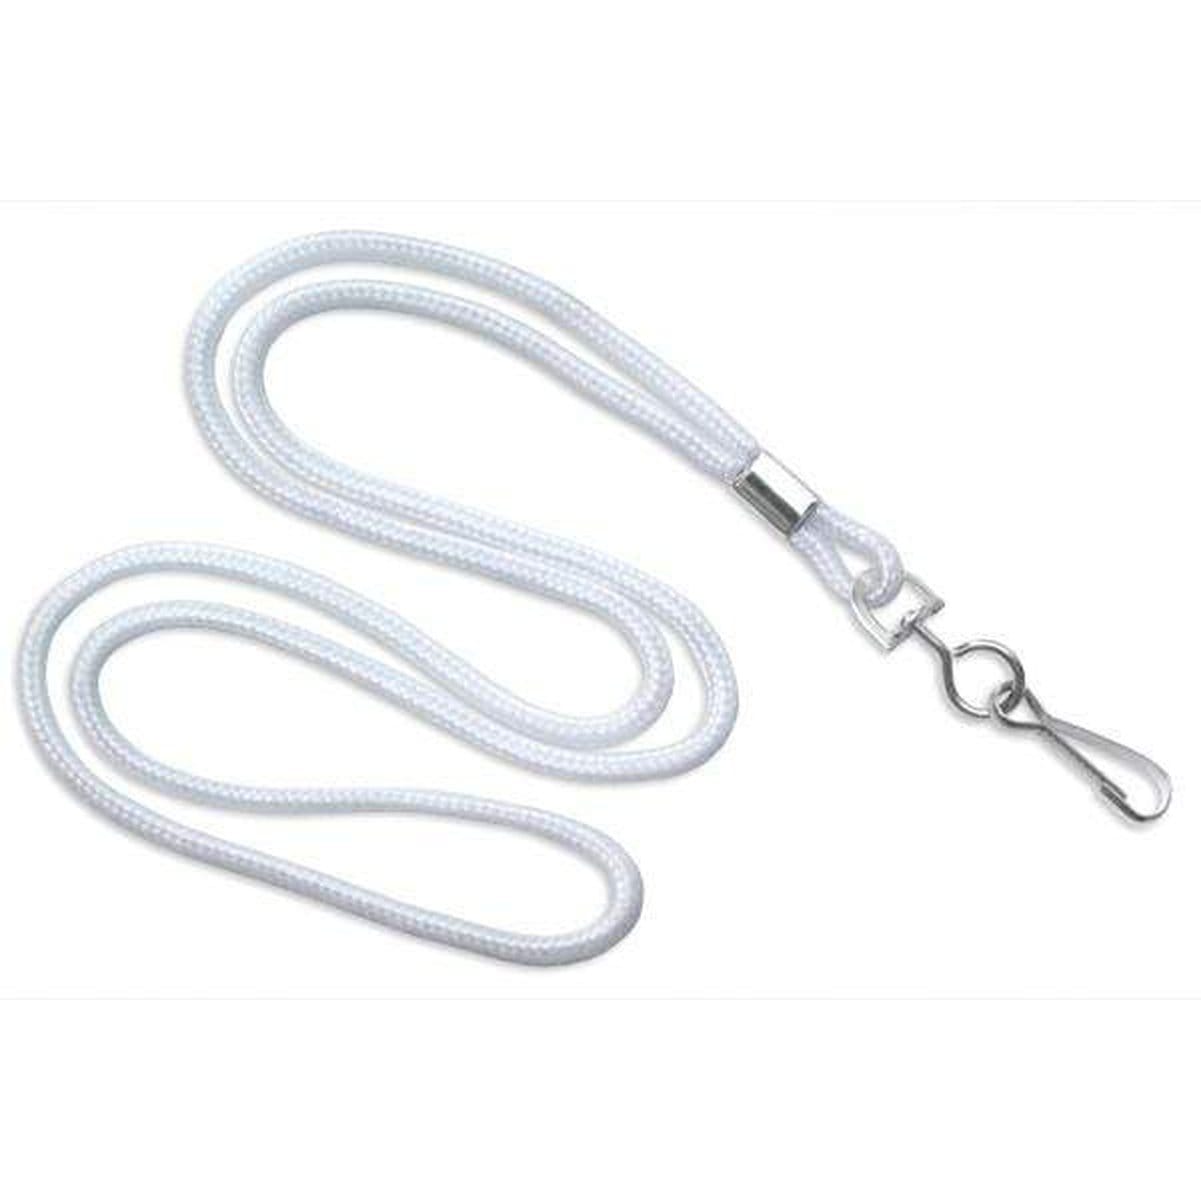 White Standard ID Neck Lanyard w/ Nickel Plated Steel Swivel Hook by Specialist ID, Packaged and Sold Individually